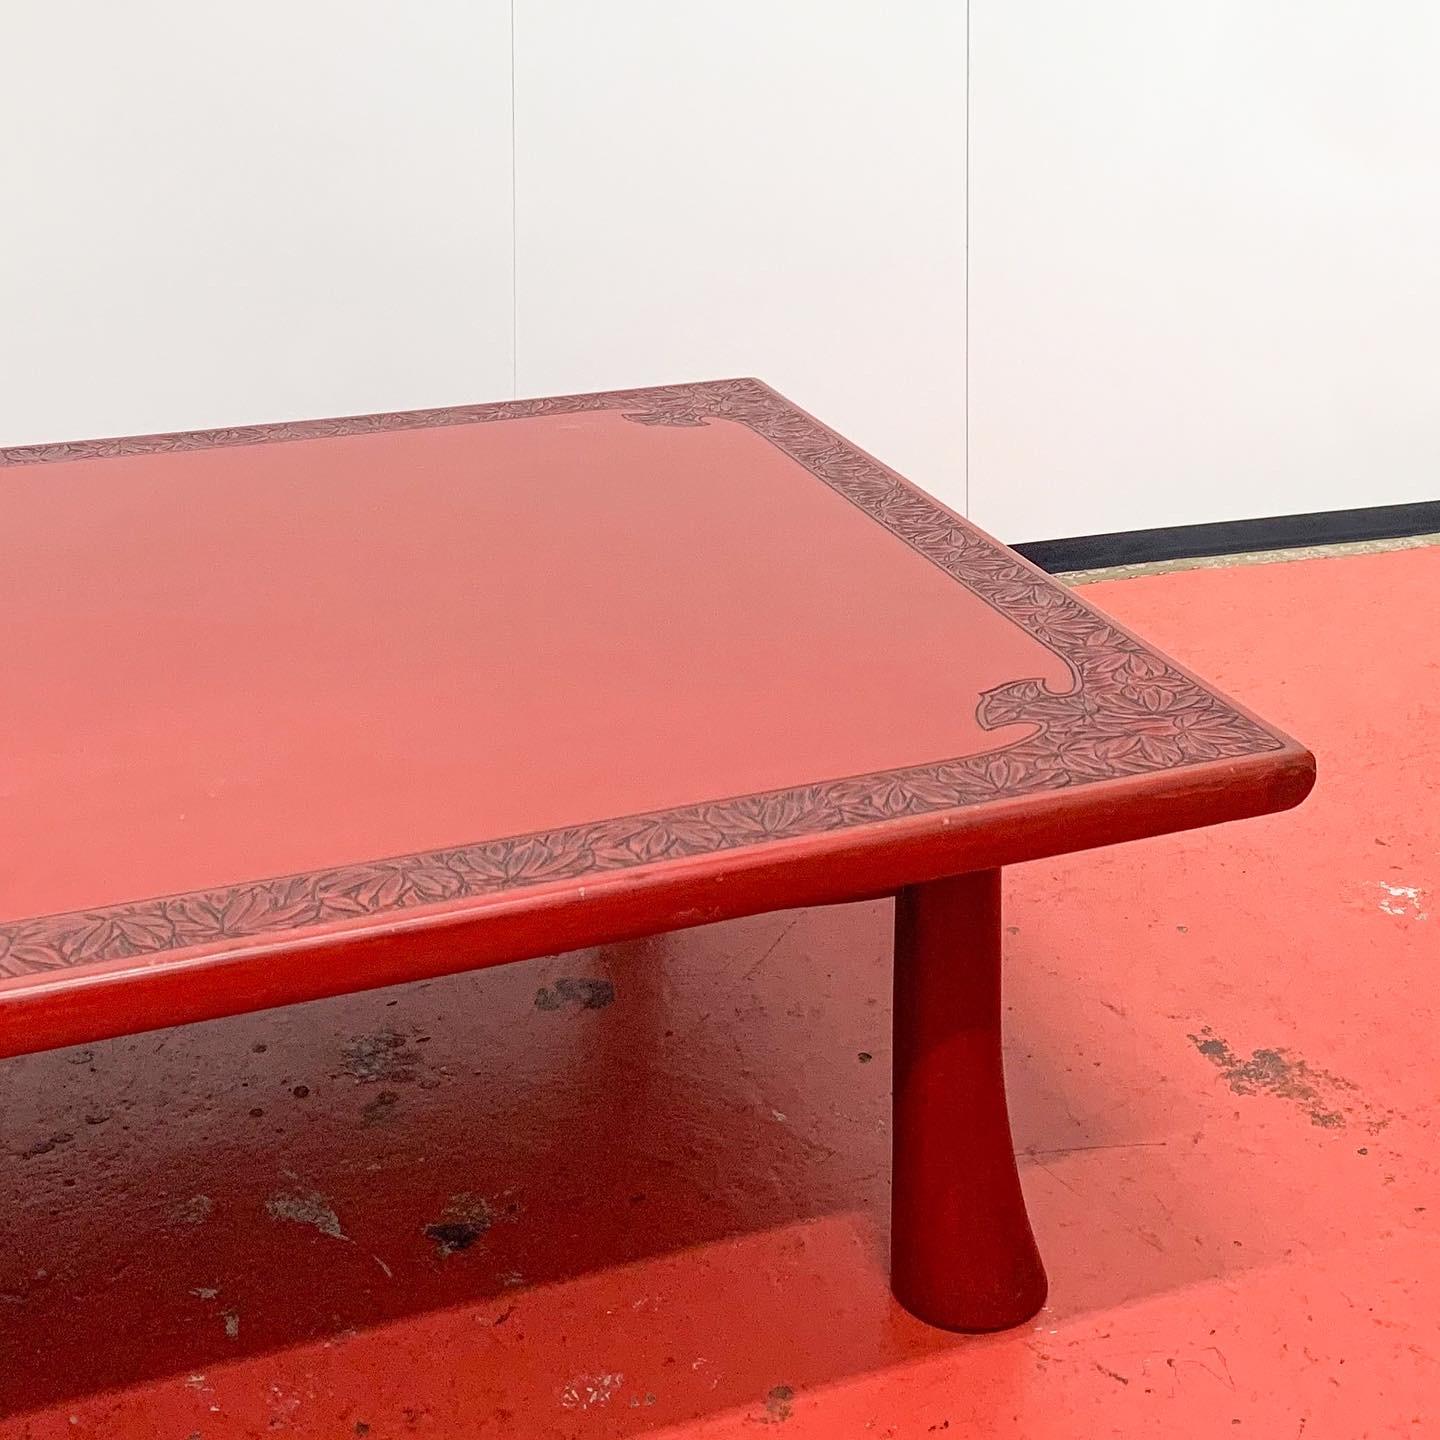 A Japanese Meiji style red lacquered coffee table made in fibreglass in the 1980s - a great look!